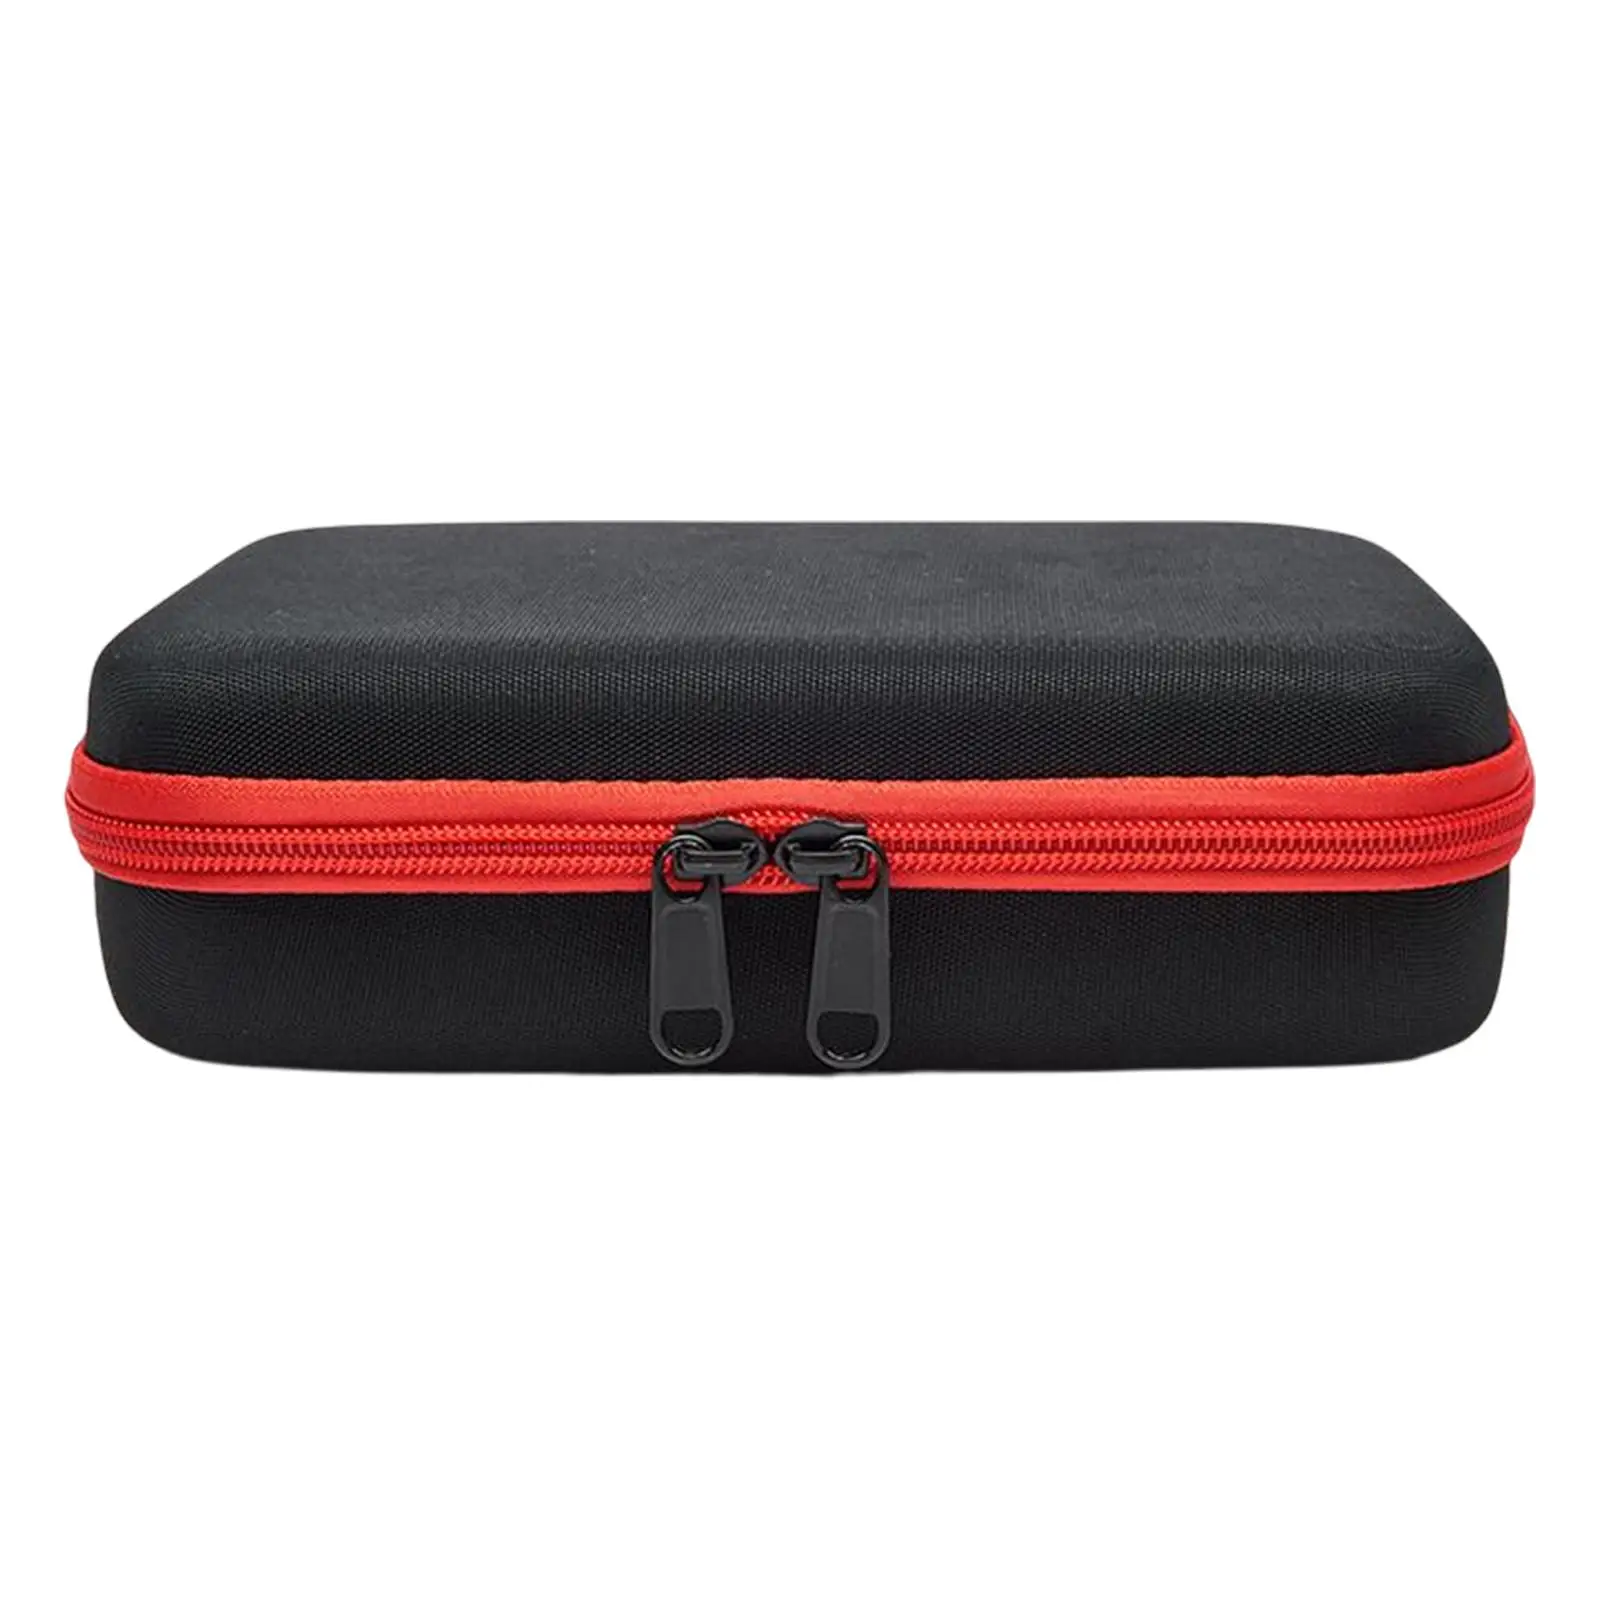 Storage Bag Waterproof Professional Durable Travel Bag Portable Premium Accessories Hard Shell for Gimbal Stabilizer